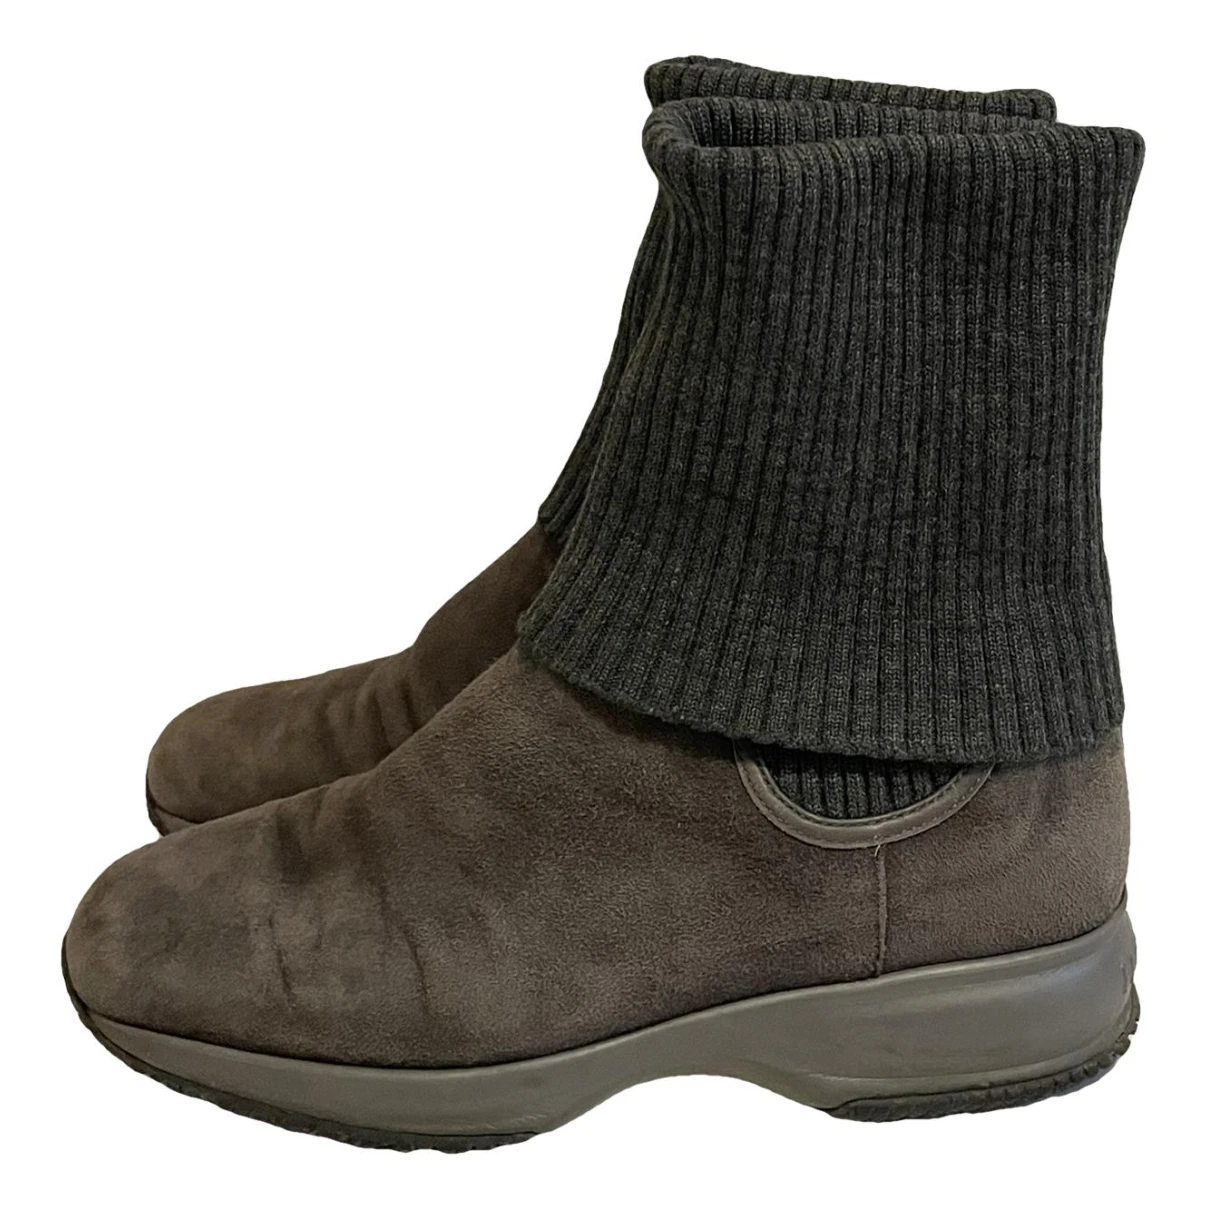 Pre-owned Hogan Leather Boots In Grey